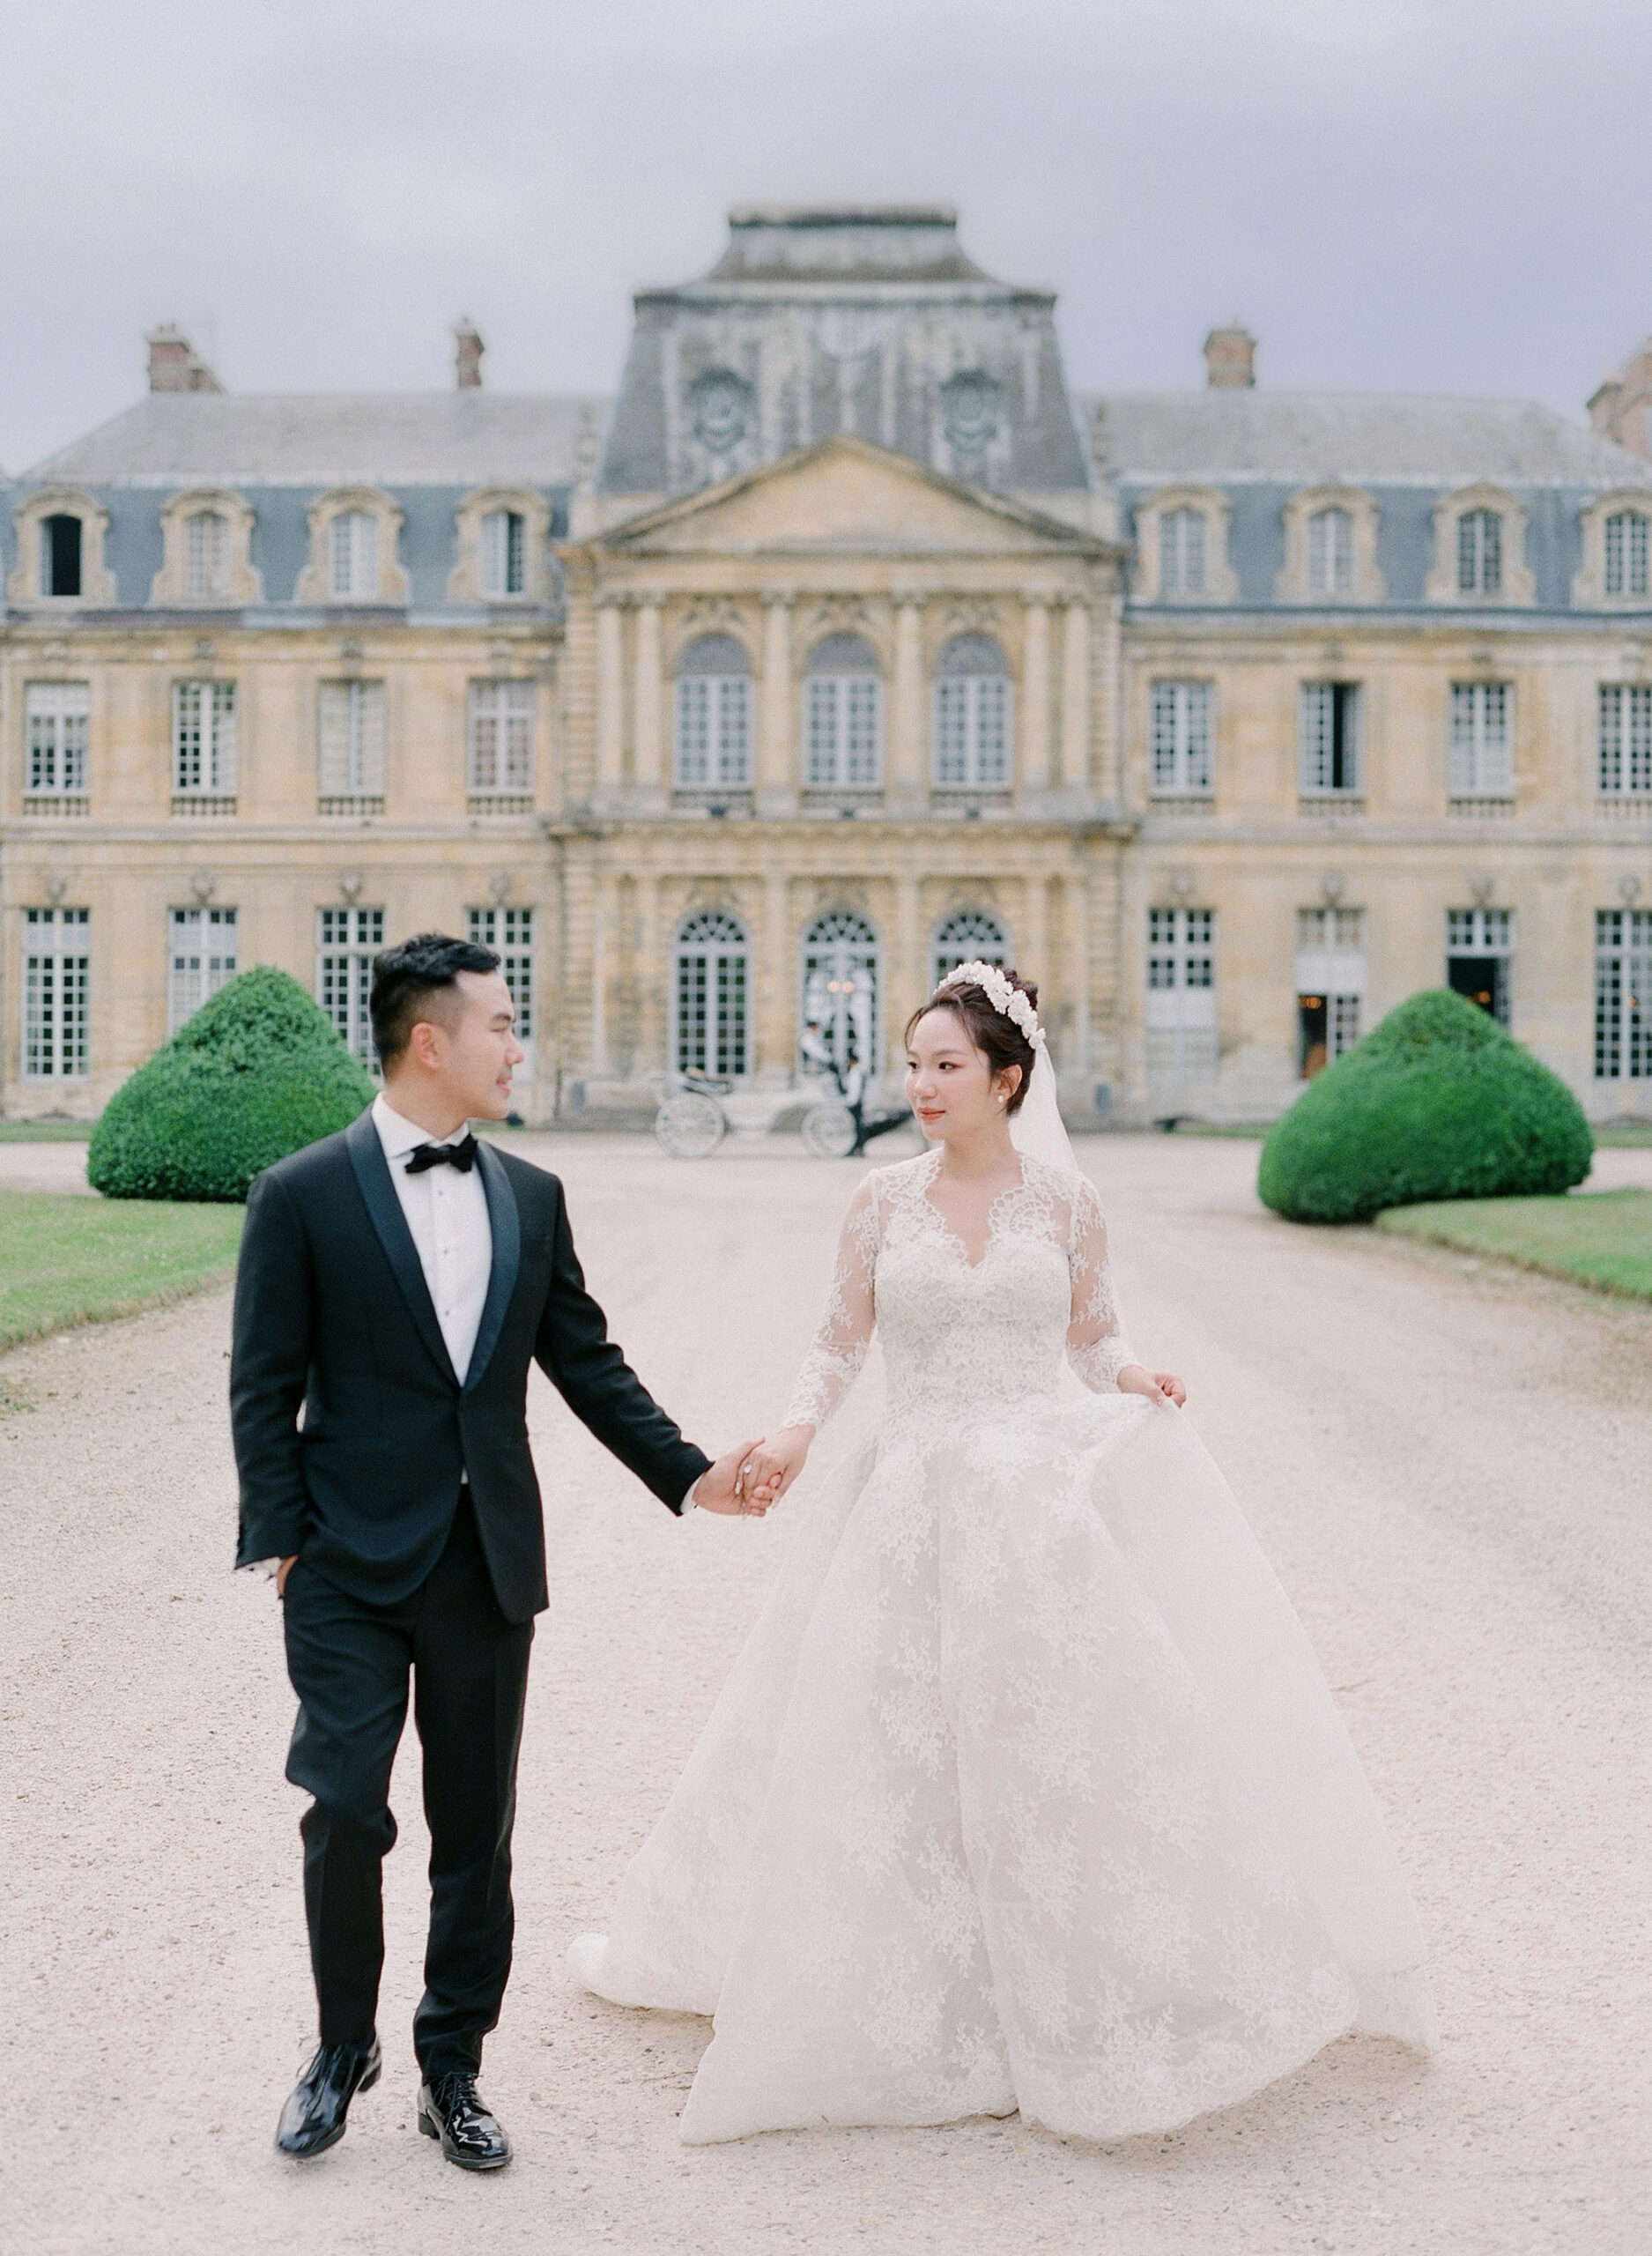 Bride and Groom at a Château de Champlâtreux Wedding in France